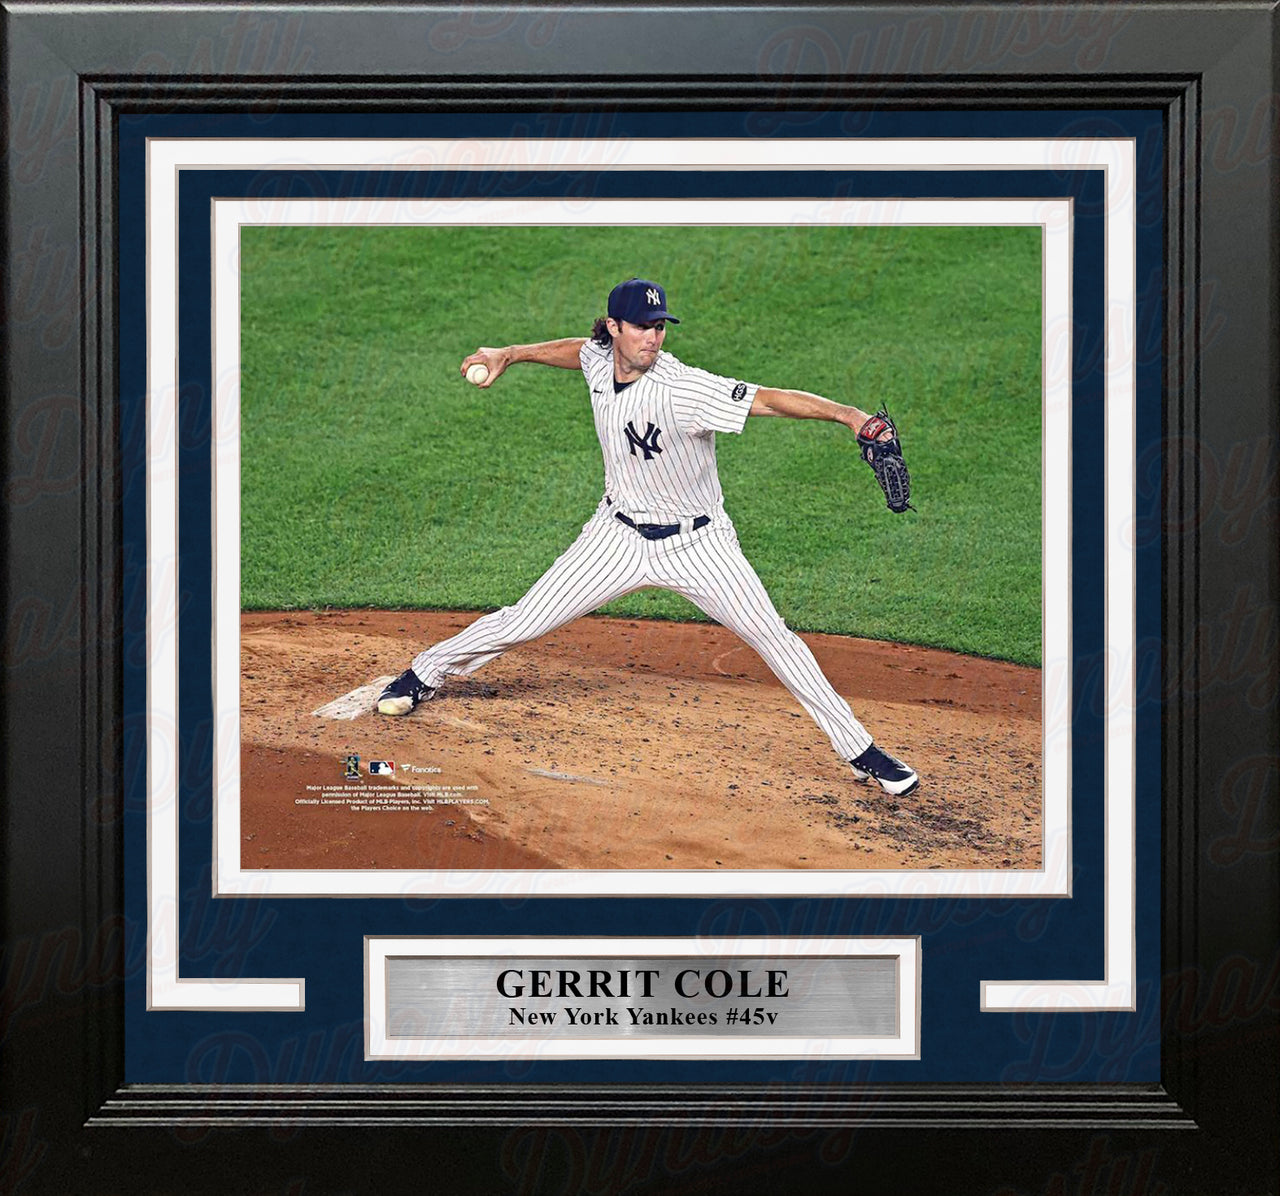 Gerrit Cole in Action New York Yankees 8" x 10" Framed Baseball Photo - Dynasty Sports & Framing 